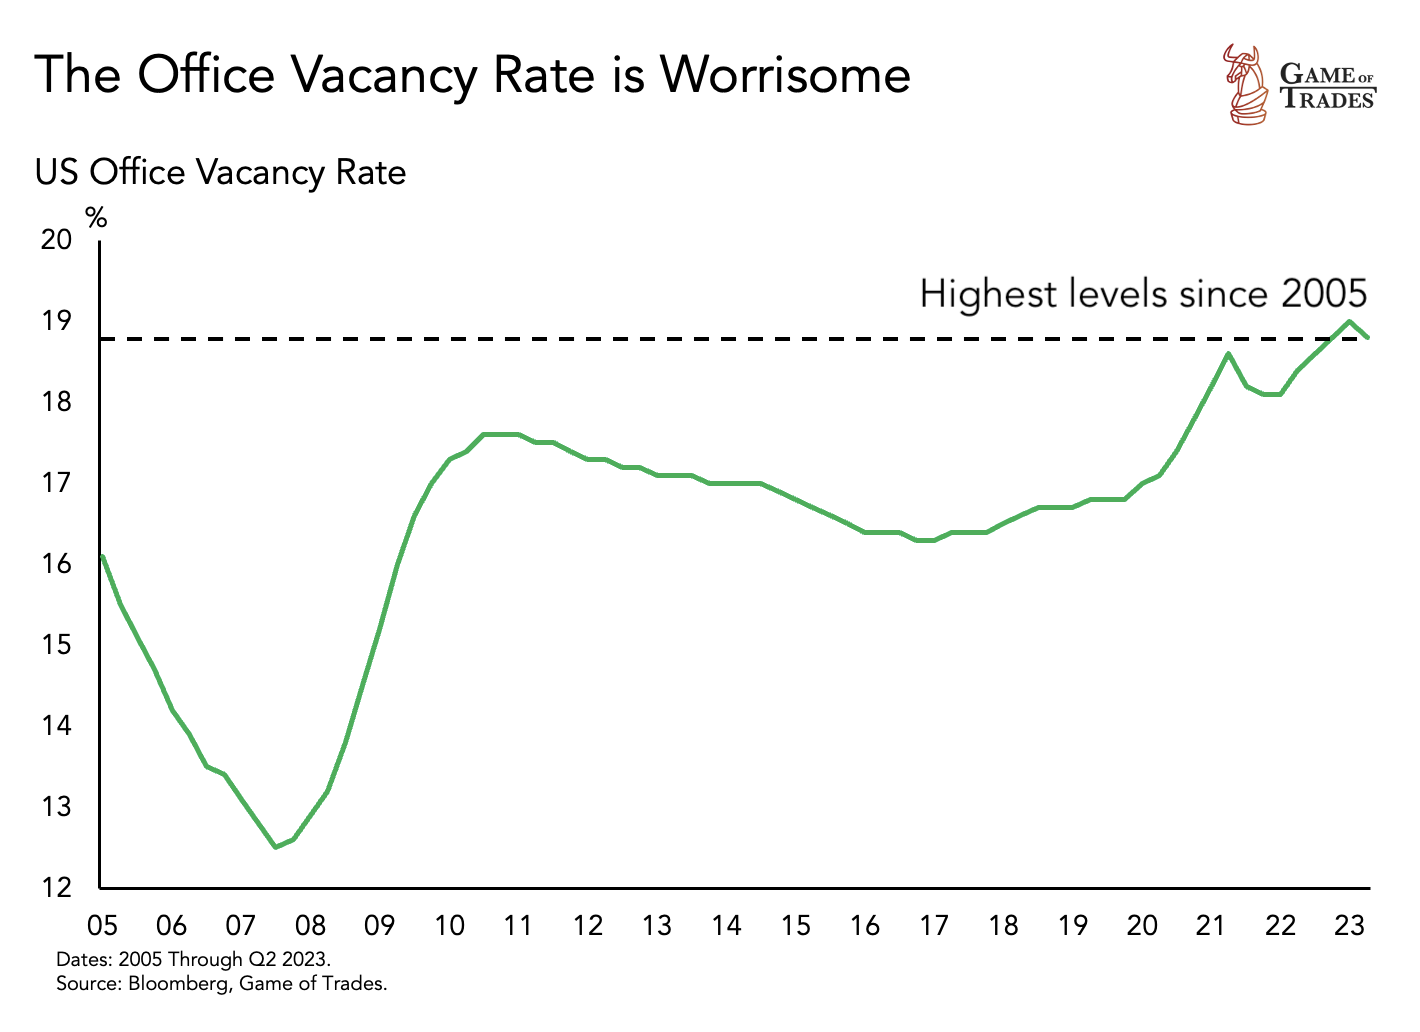 US Office Vacancy Rate